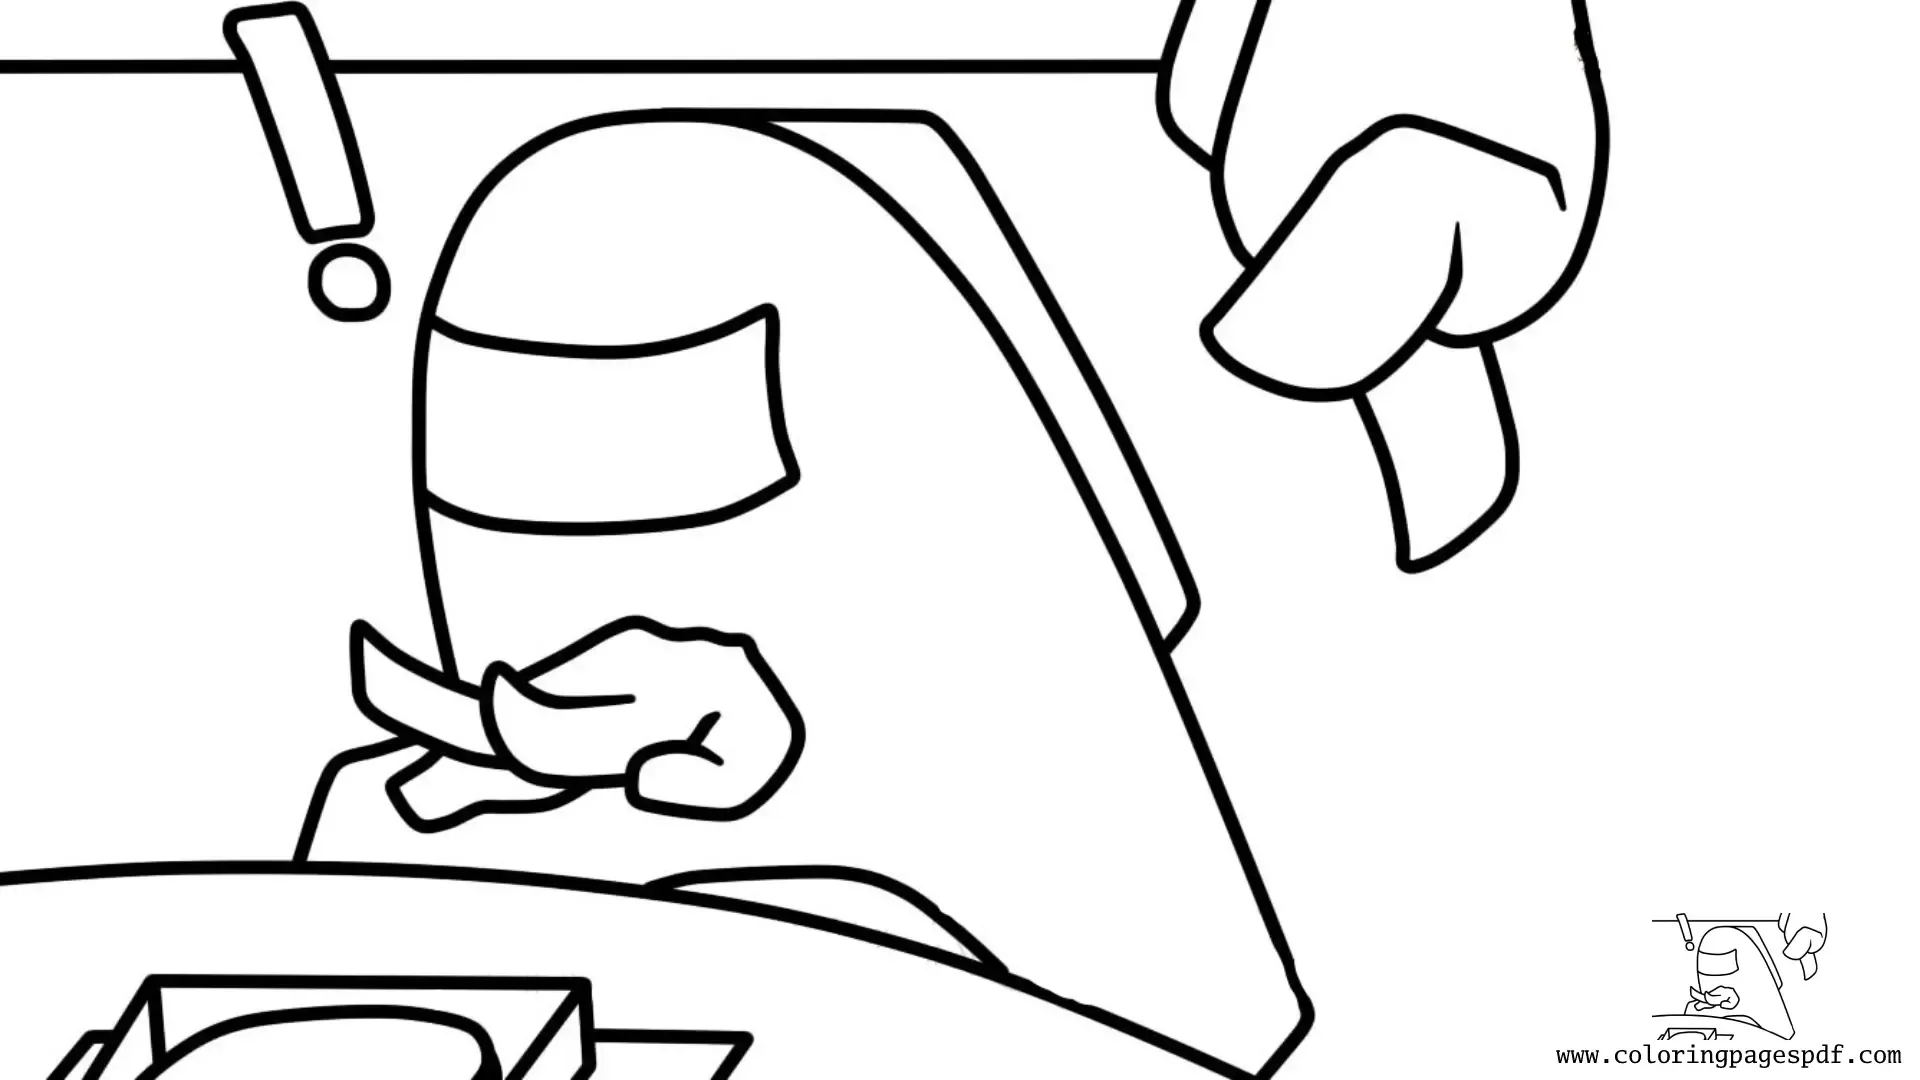 Coloring Page Of A Crewmate About To Get Killed